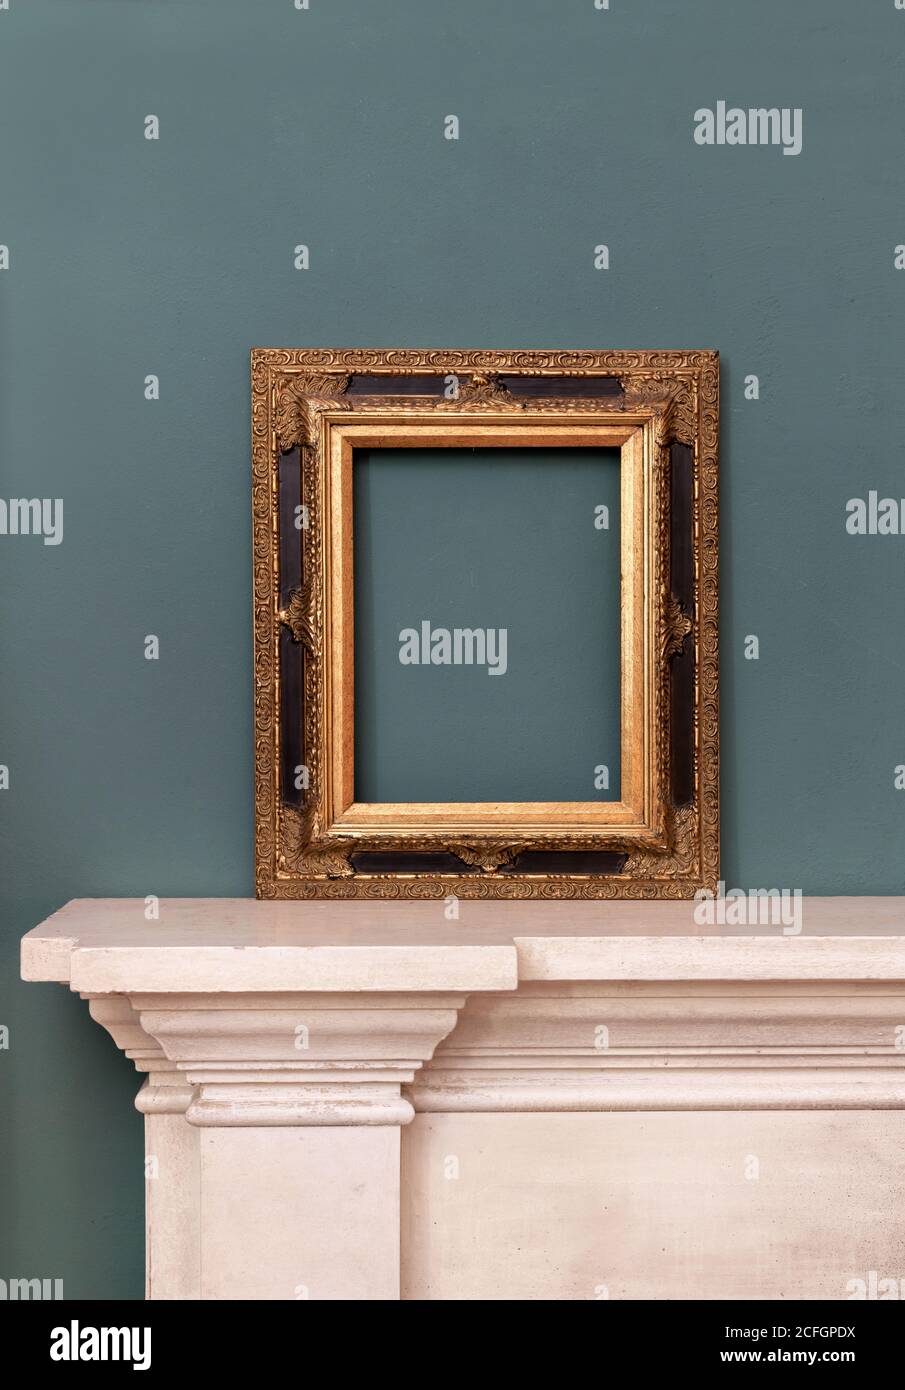 Gilded or golden empty rectangular vintage frame on a mantelpiece for a picture or painting leaning against a green wall Stock Photo